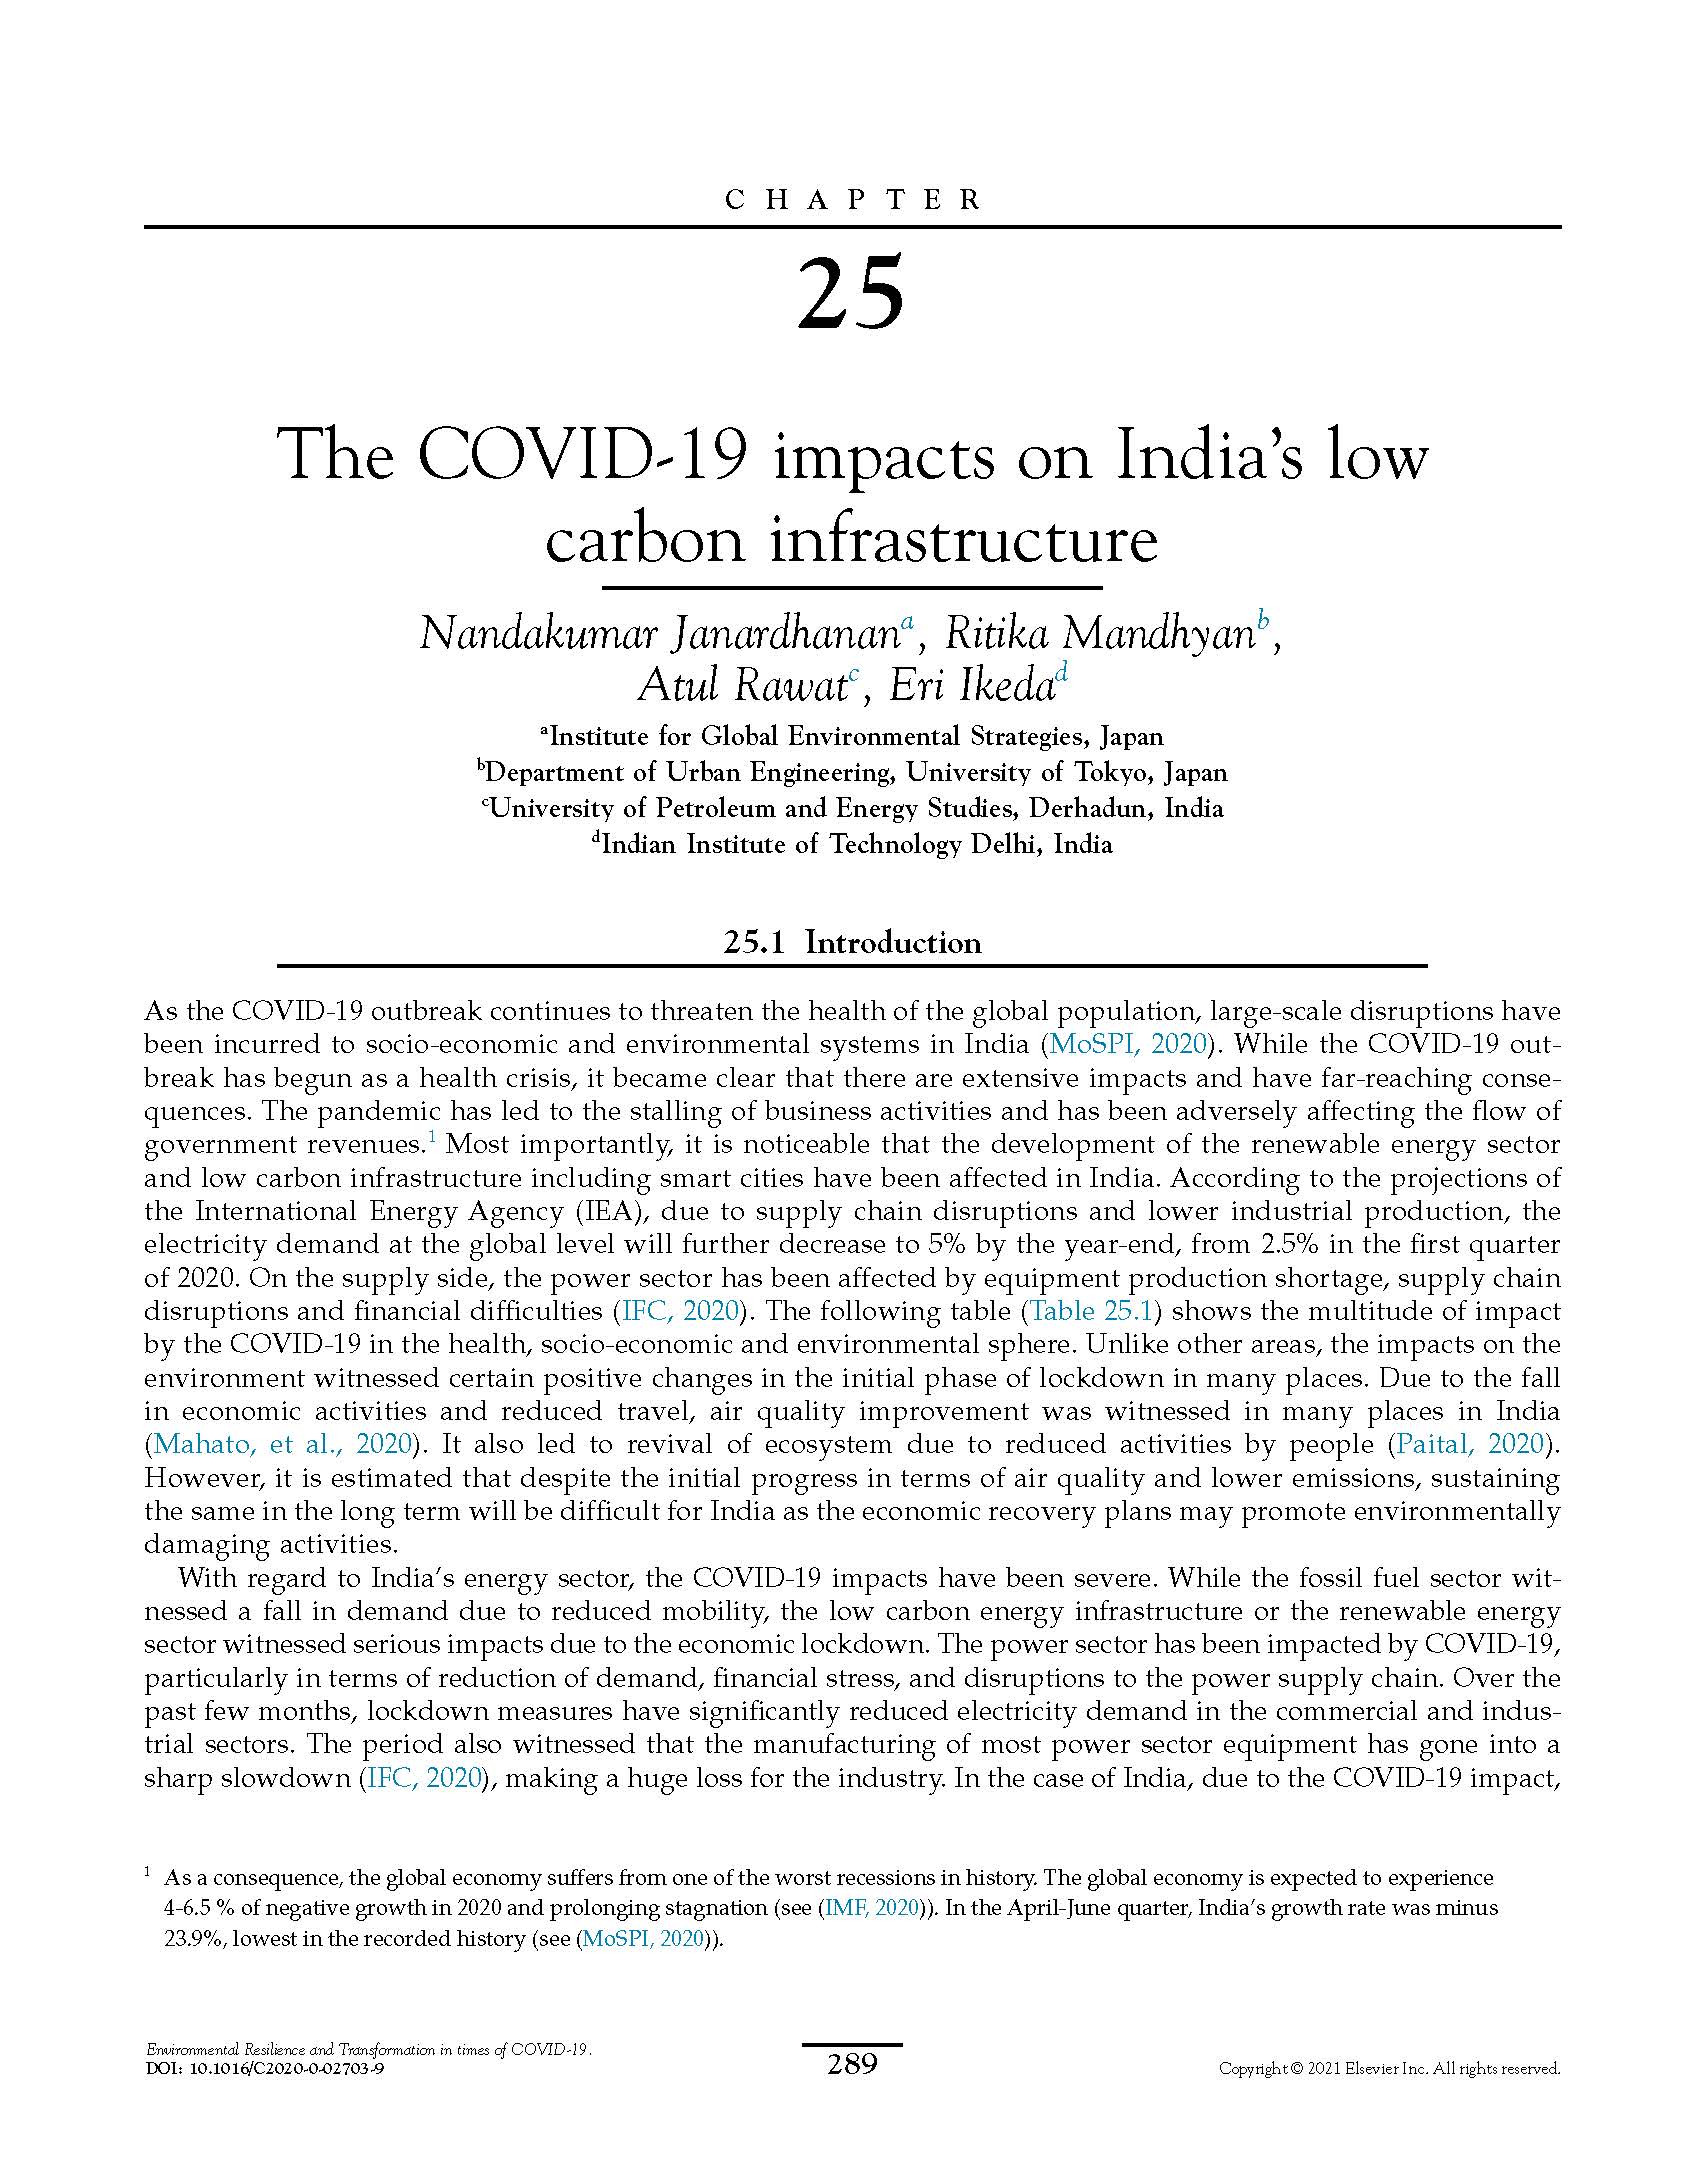 The COVID-19 impacts on India’s low carbon infrastructure